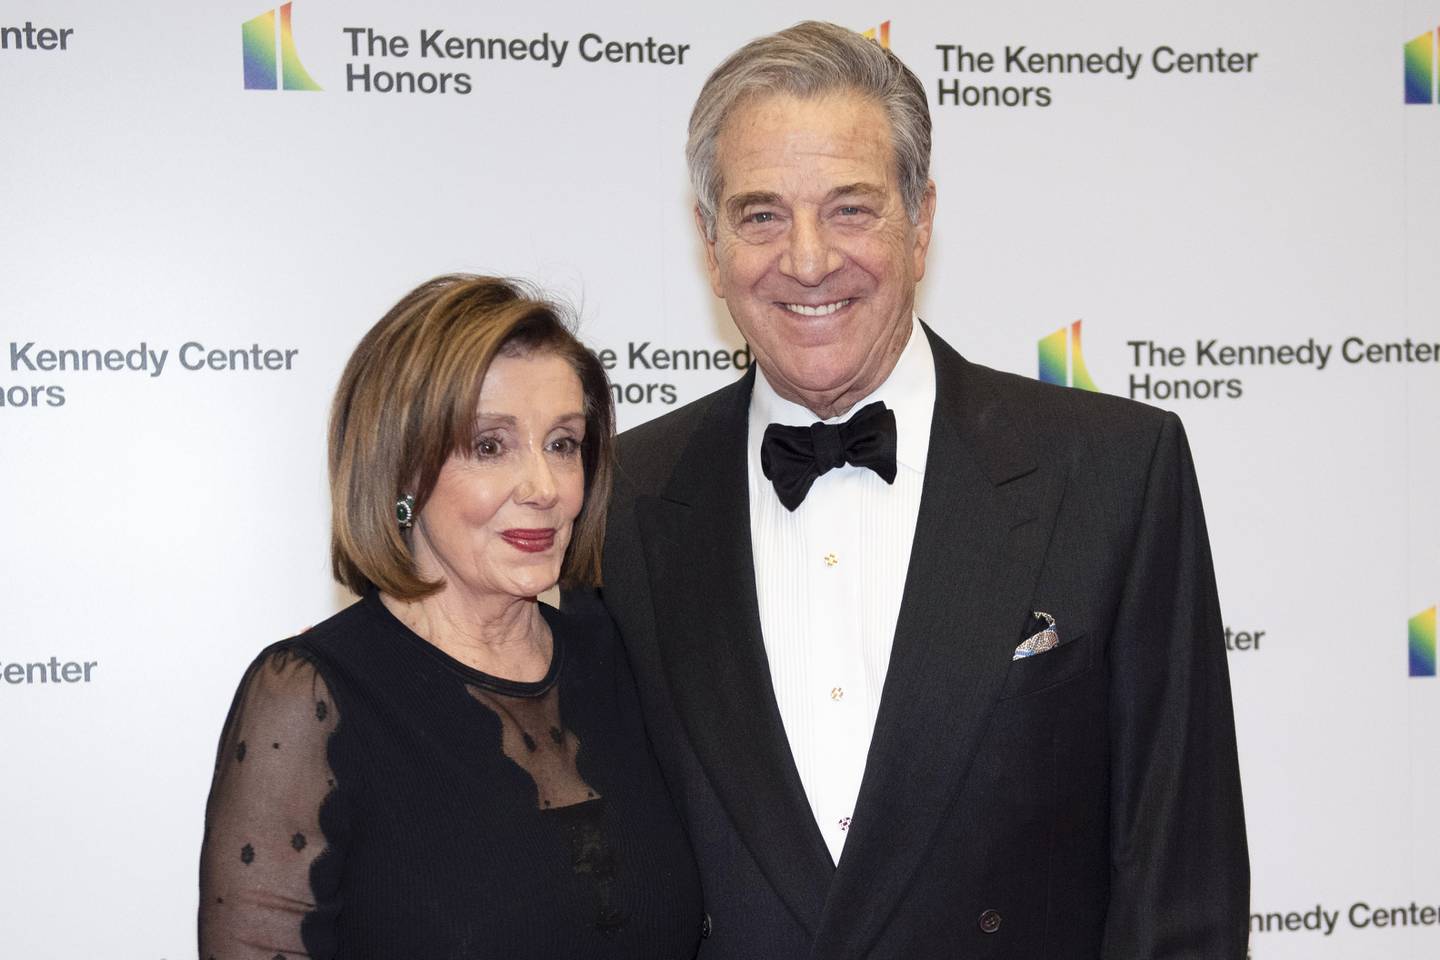 FILE - Speaker of the House Nancy Pelosi, D-Calif., and her husband, Paul Pelosi, arrive at the State Department for the Kennedy Center Honors State Department Dinner, Dec. 7, 2019, in Washington. House Speaker Nancy Pelosi’s husband, Paul, was “violently assaulted” by an assailant who broke into their San Francisco home early Friday, Oct. 28, 2022, and he is now in the hospital and expected to make a full recovery, said her spokesman, Drew Hammill.